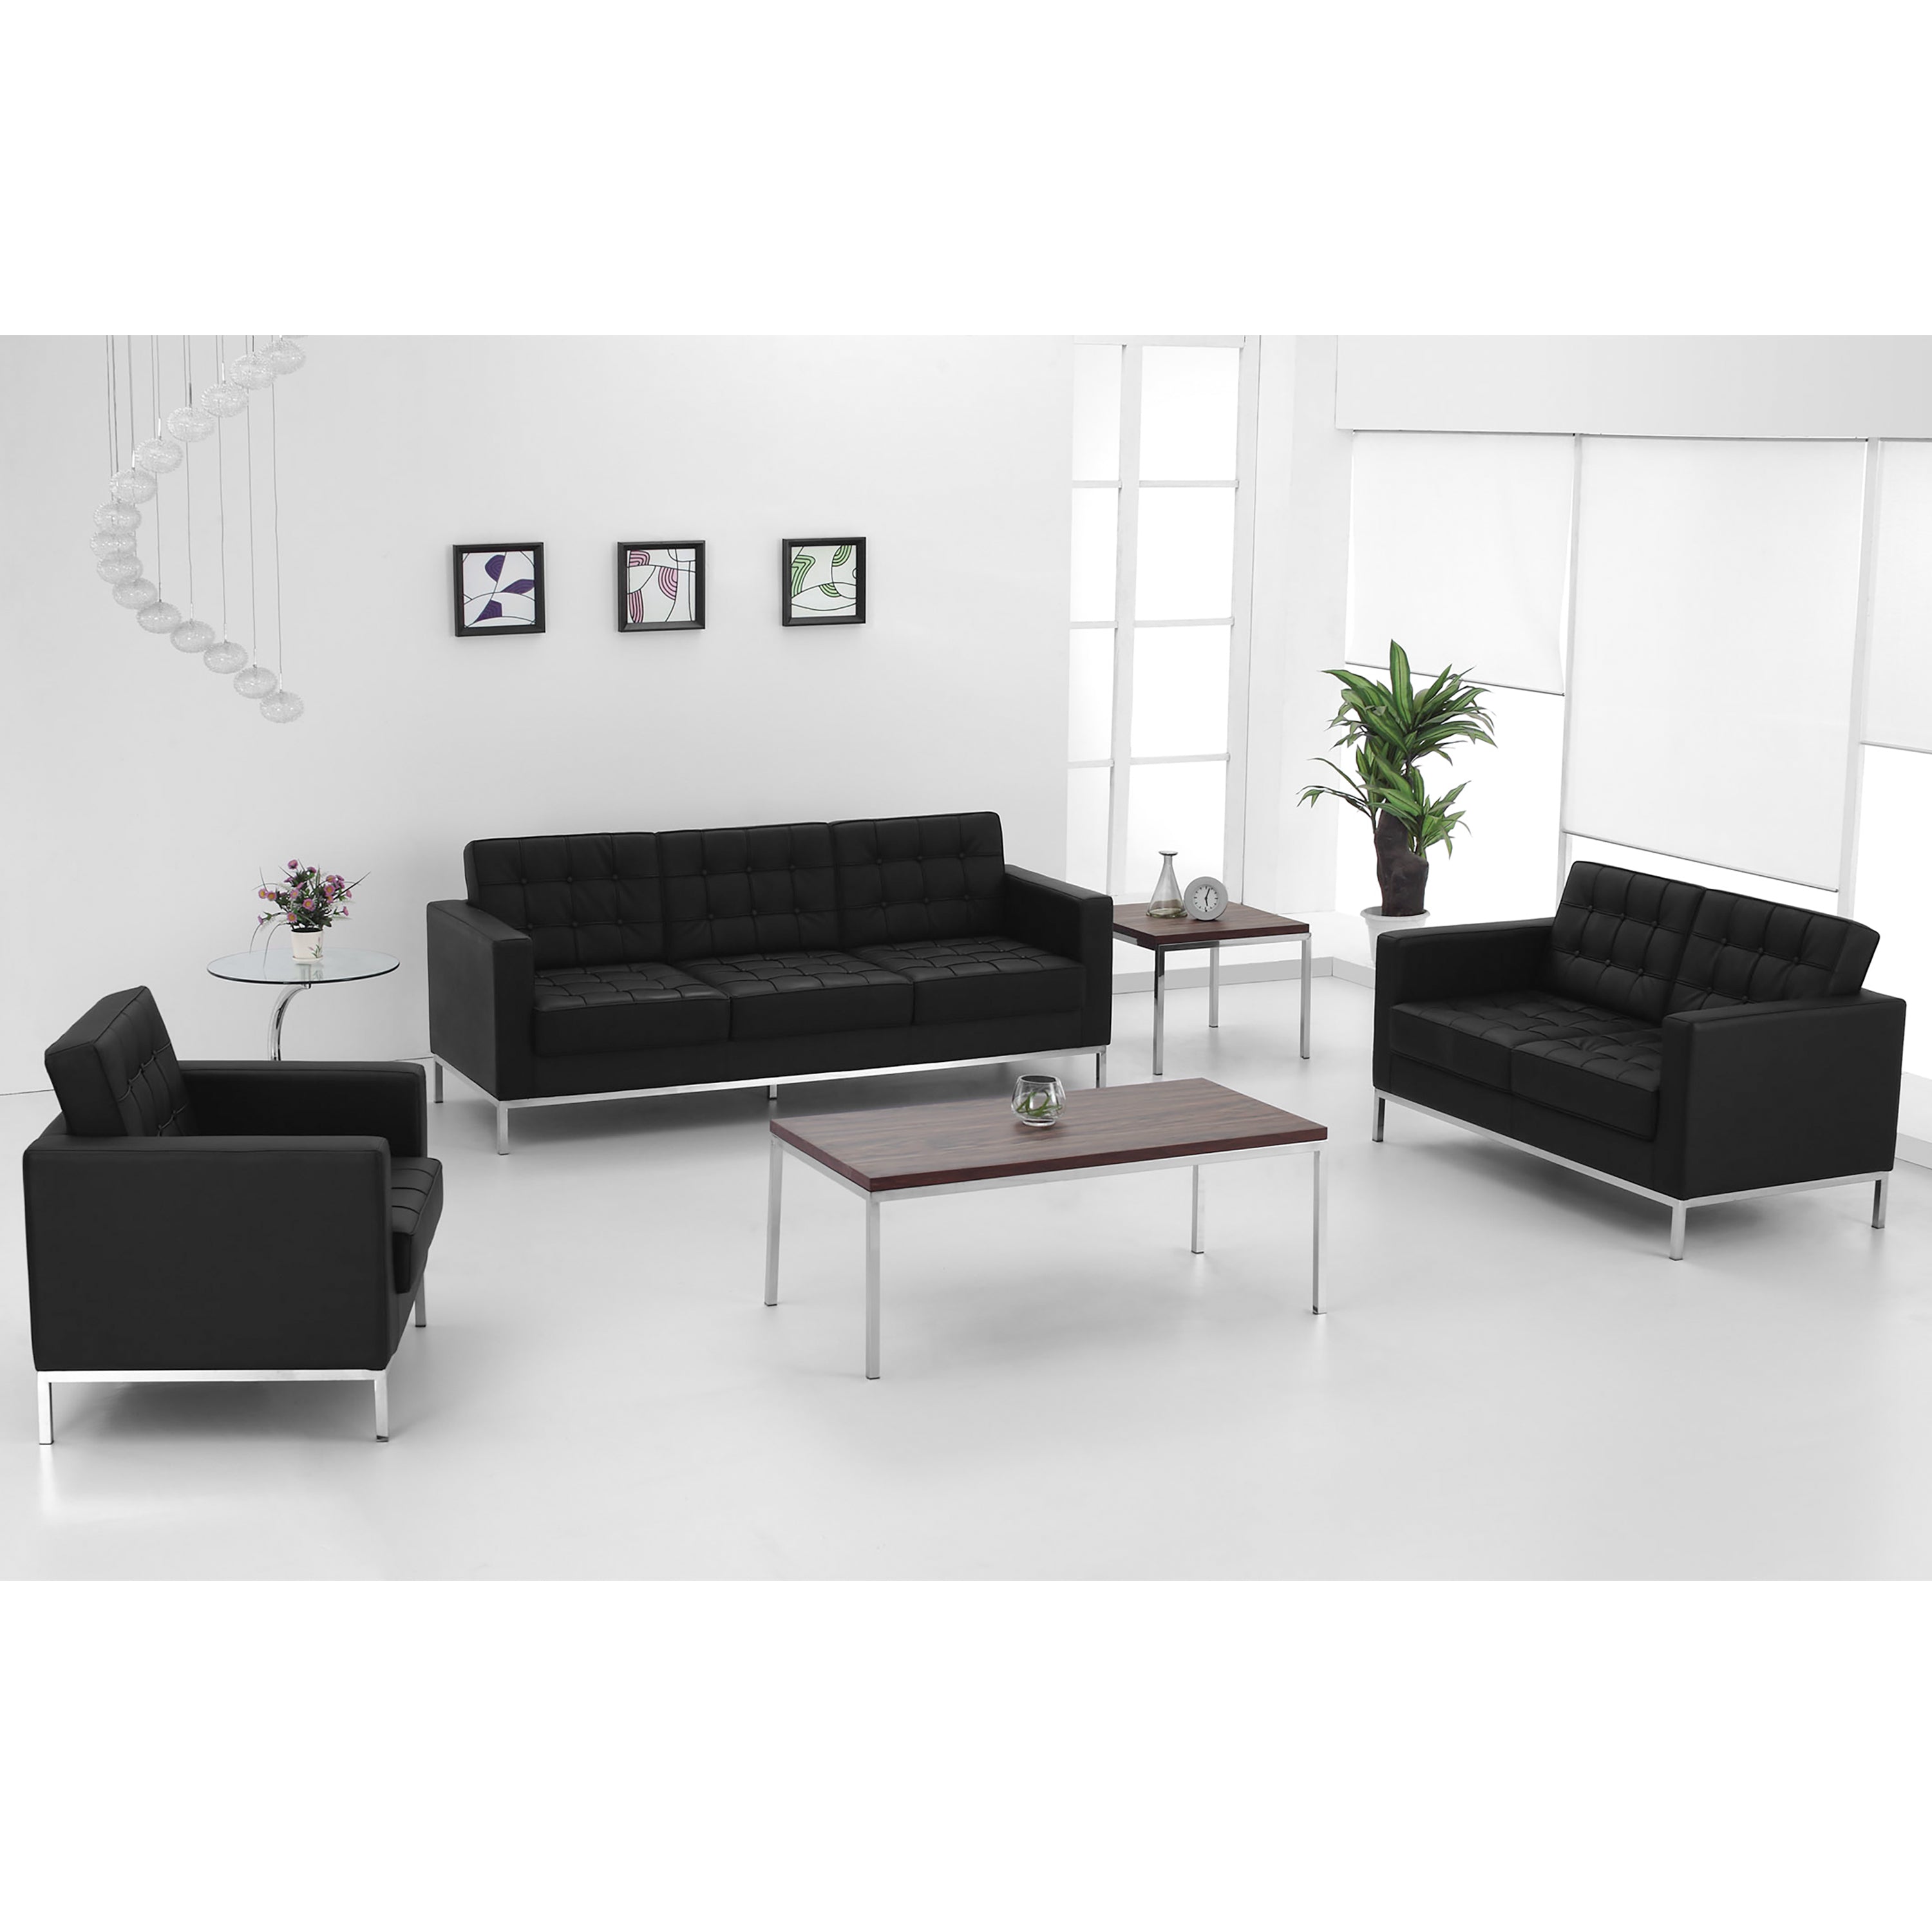 HERCULES Lacey Series Contemporary Button Tufted LeatherSoft Loveseat with Integrated Stainless Steel Frame-Reception Loveseat-Flash Furniture-Wall2Wall Furnishings